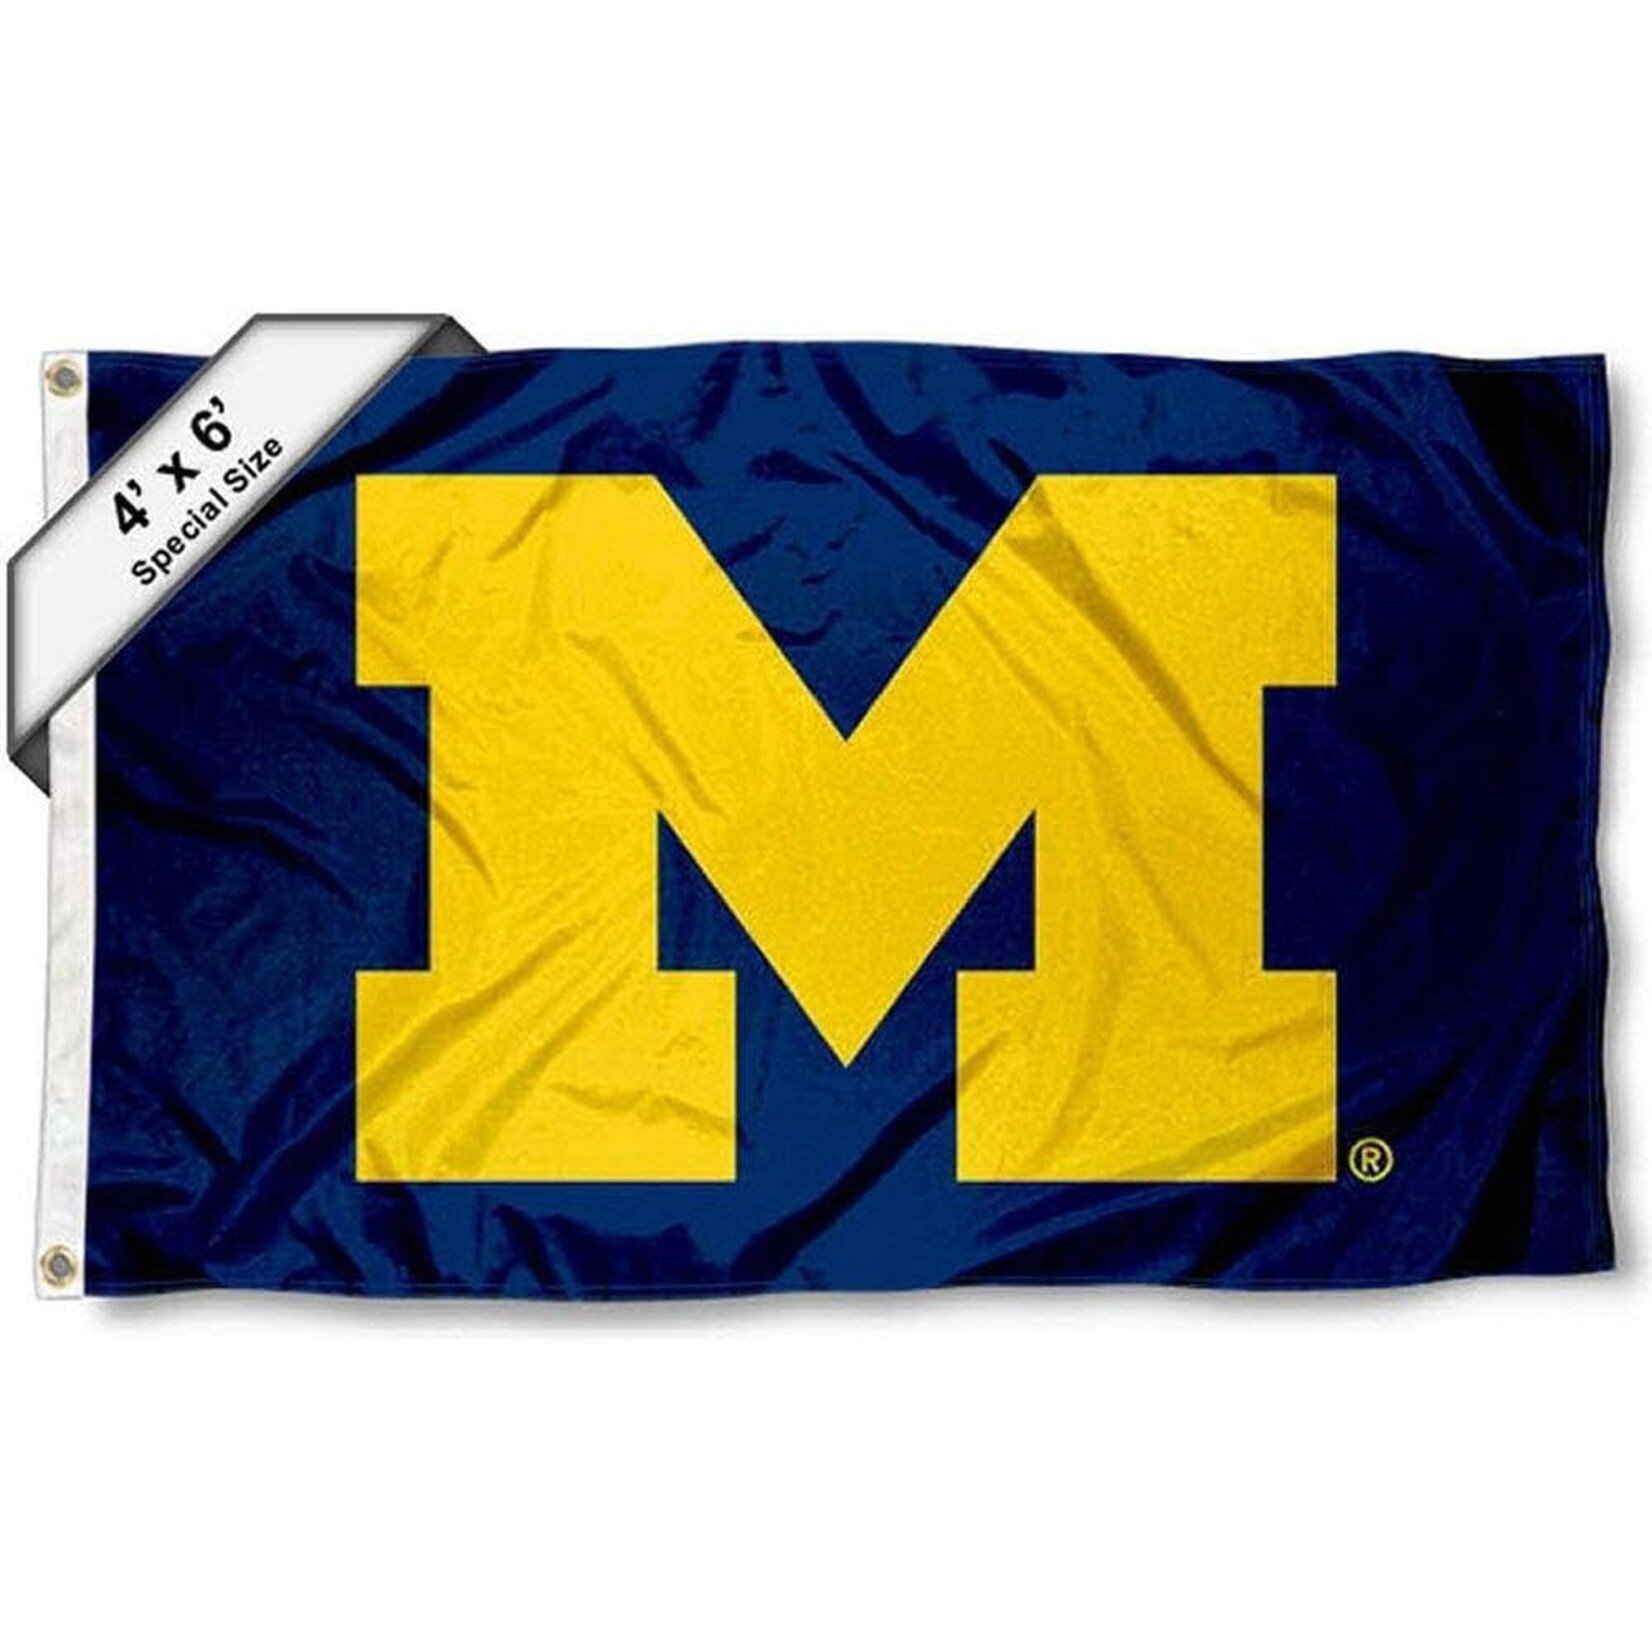 Sewing Concepts Michigan Wolverines 4' x 6' Flag Blue w/Gold "M" & Grommets